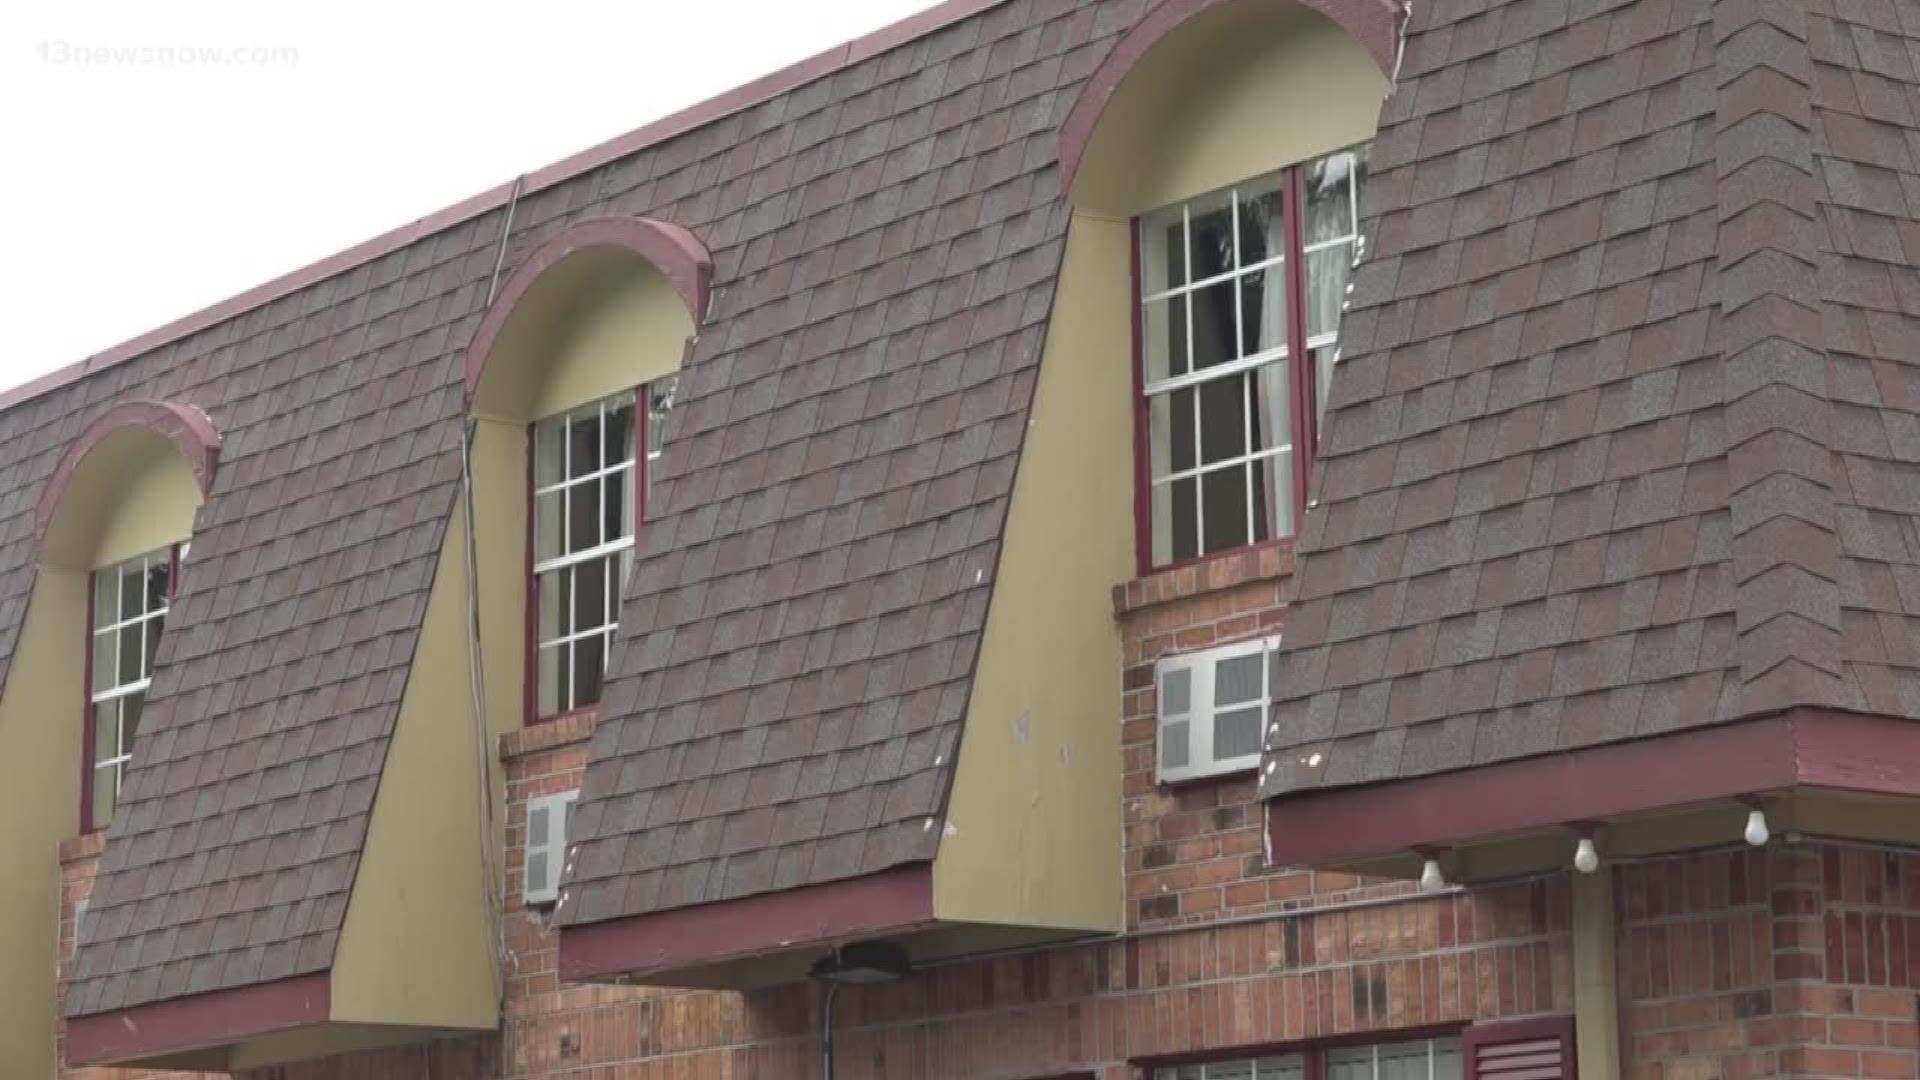 Williamsburg City Council is set to vote on turning a hotel into affordable apartments.